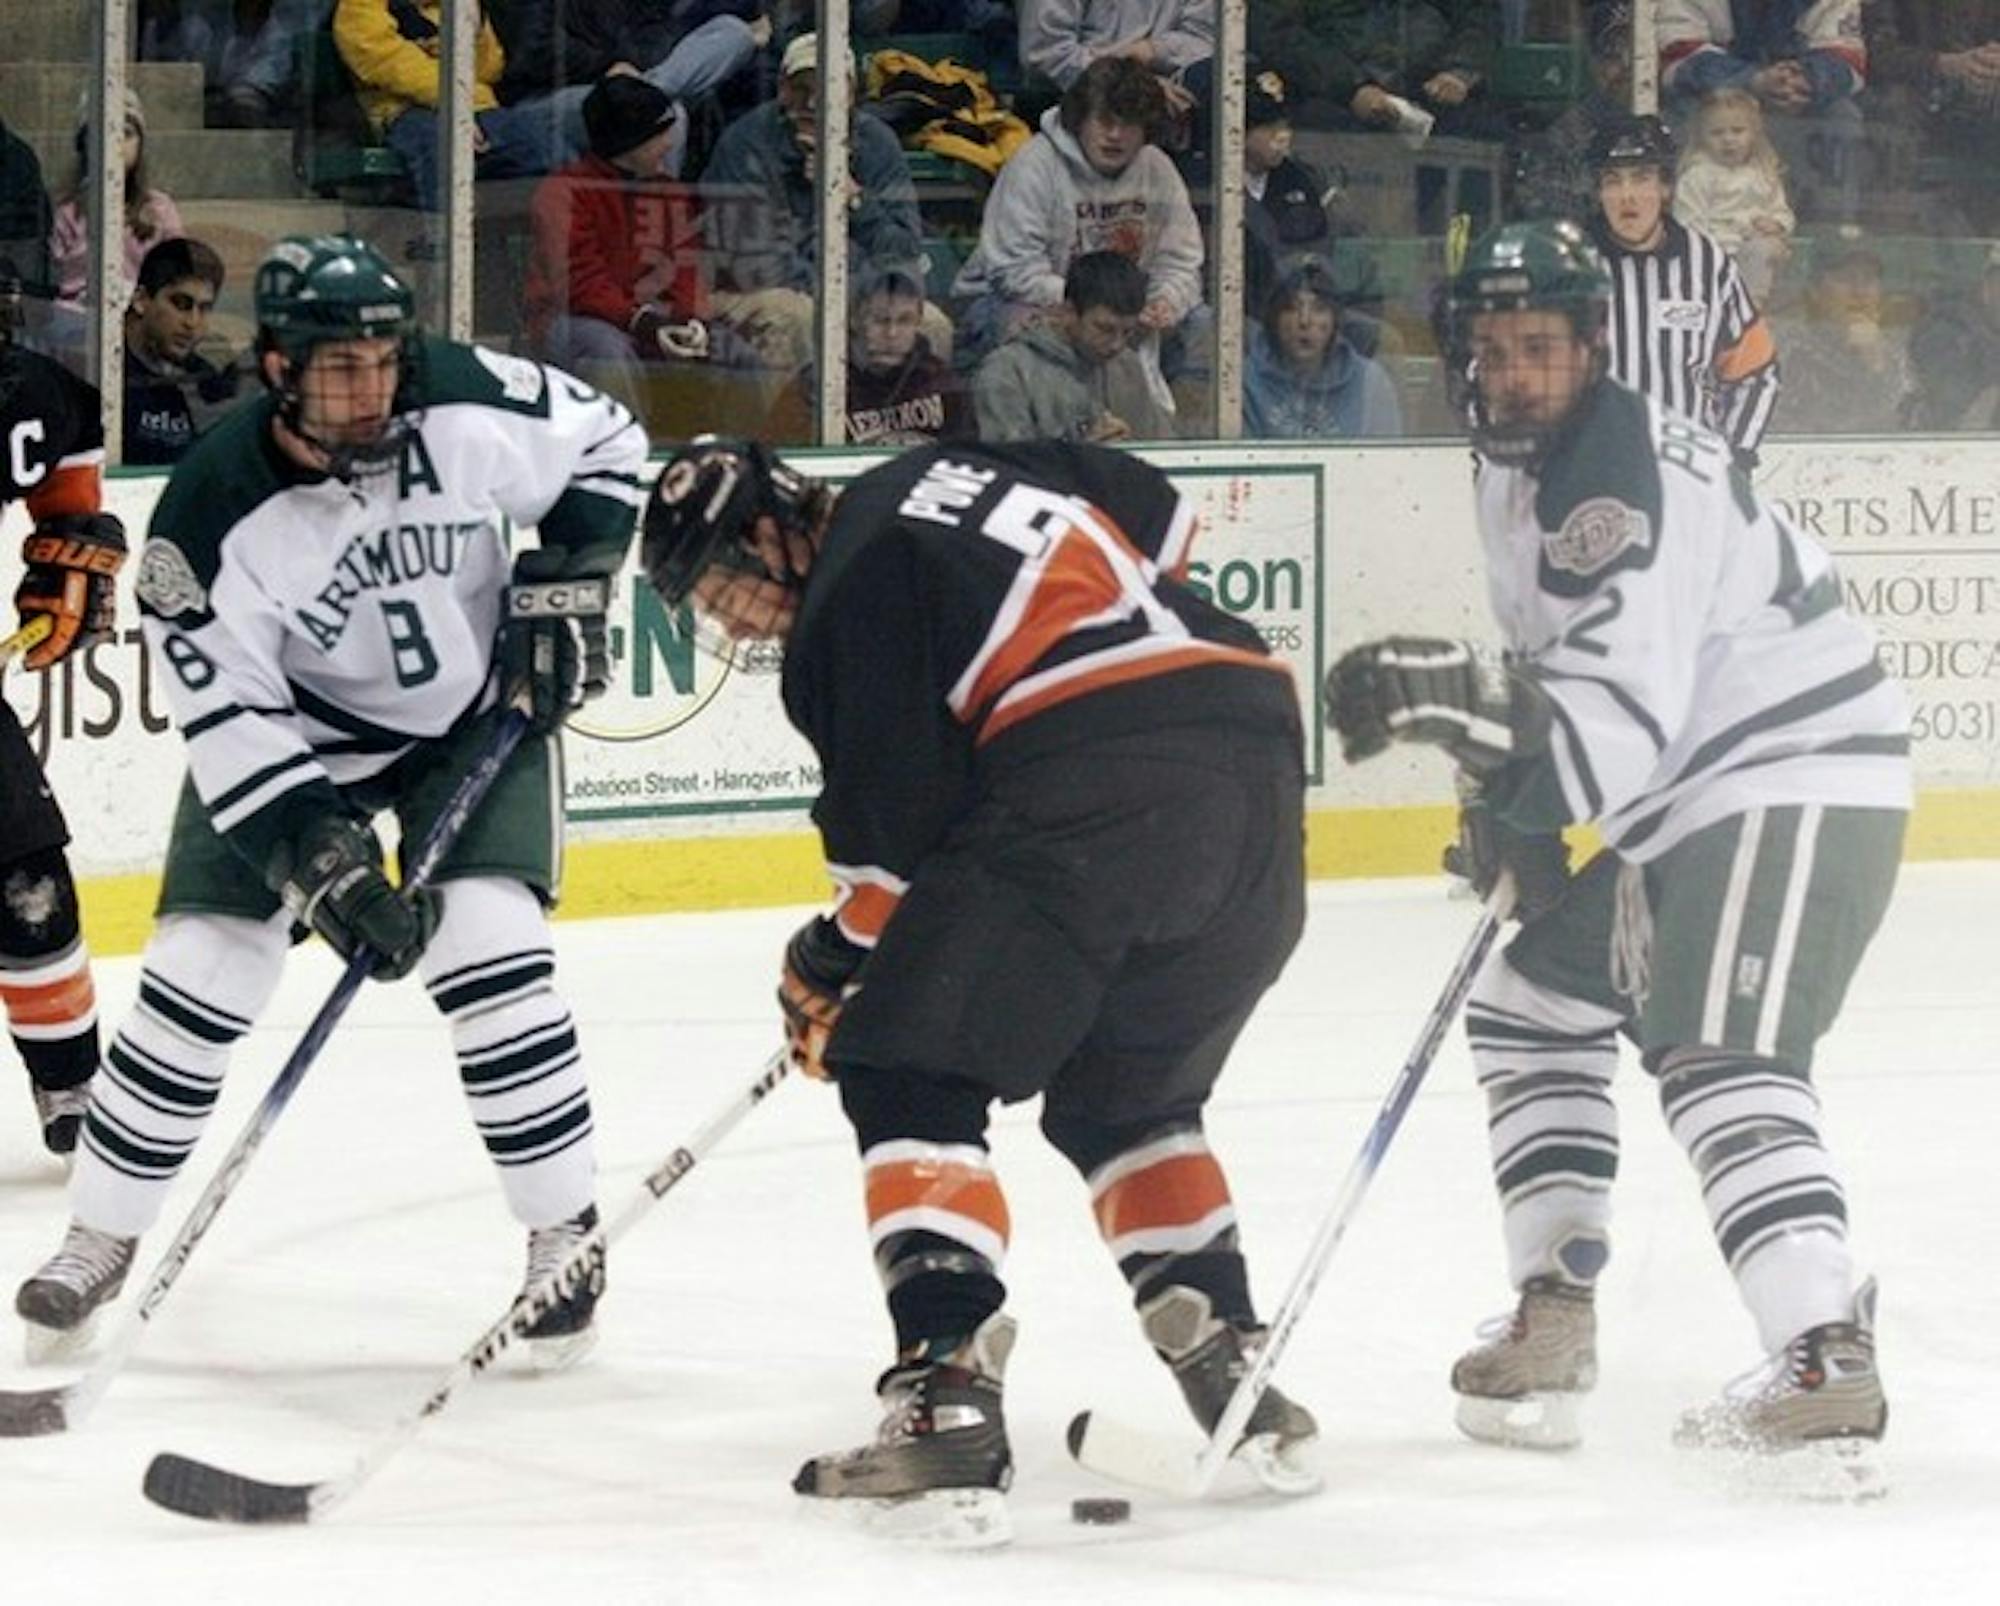 Garret Overlock '06 (pictured left) and Rob Pritchard '09 (right) work together to control a loose puck. The Big Green hopes that next year its freshmen will mesh with the team's veterans as well as they did in 2005-06.